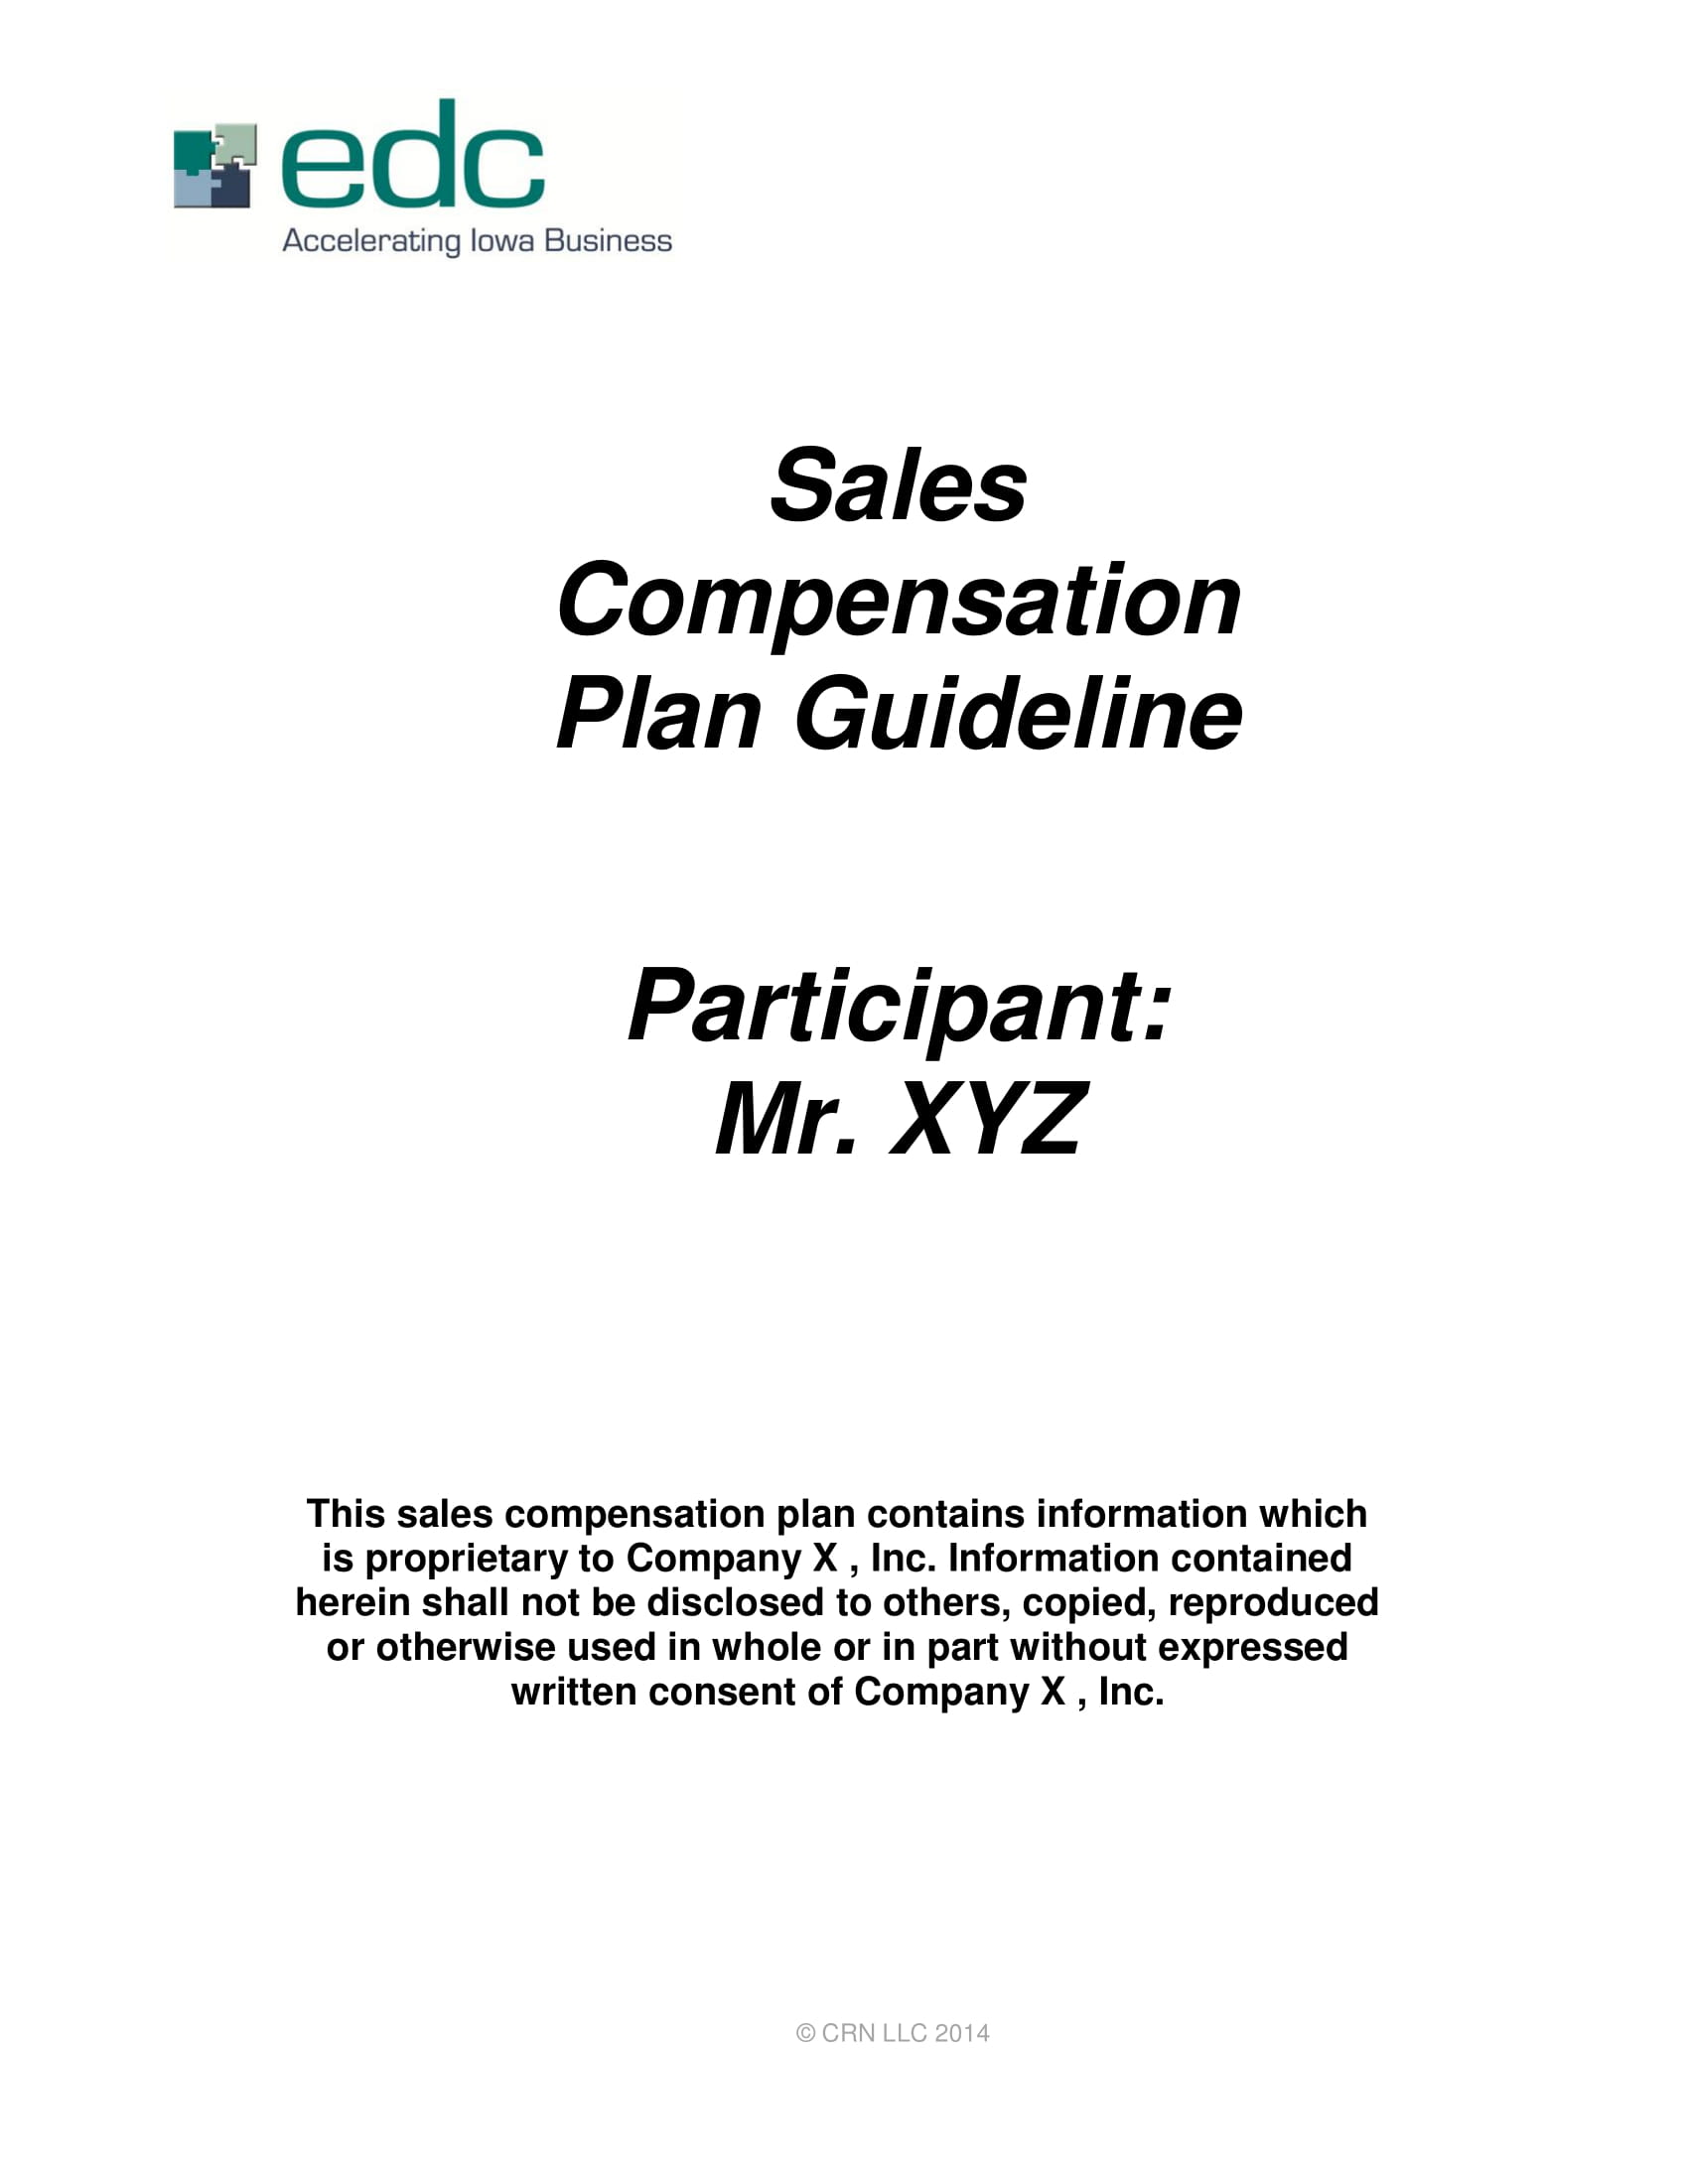 Sales Compensation Plan Template and Guidelines Example 01